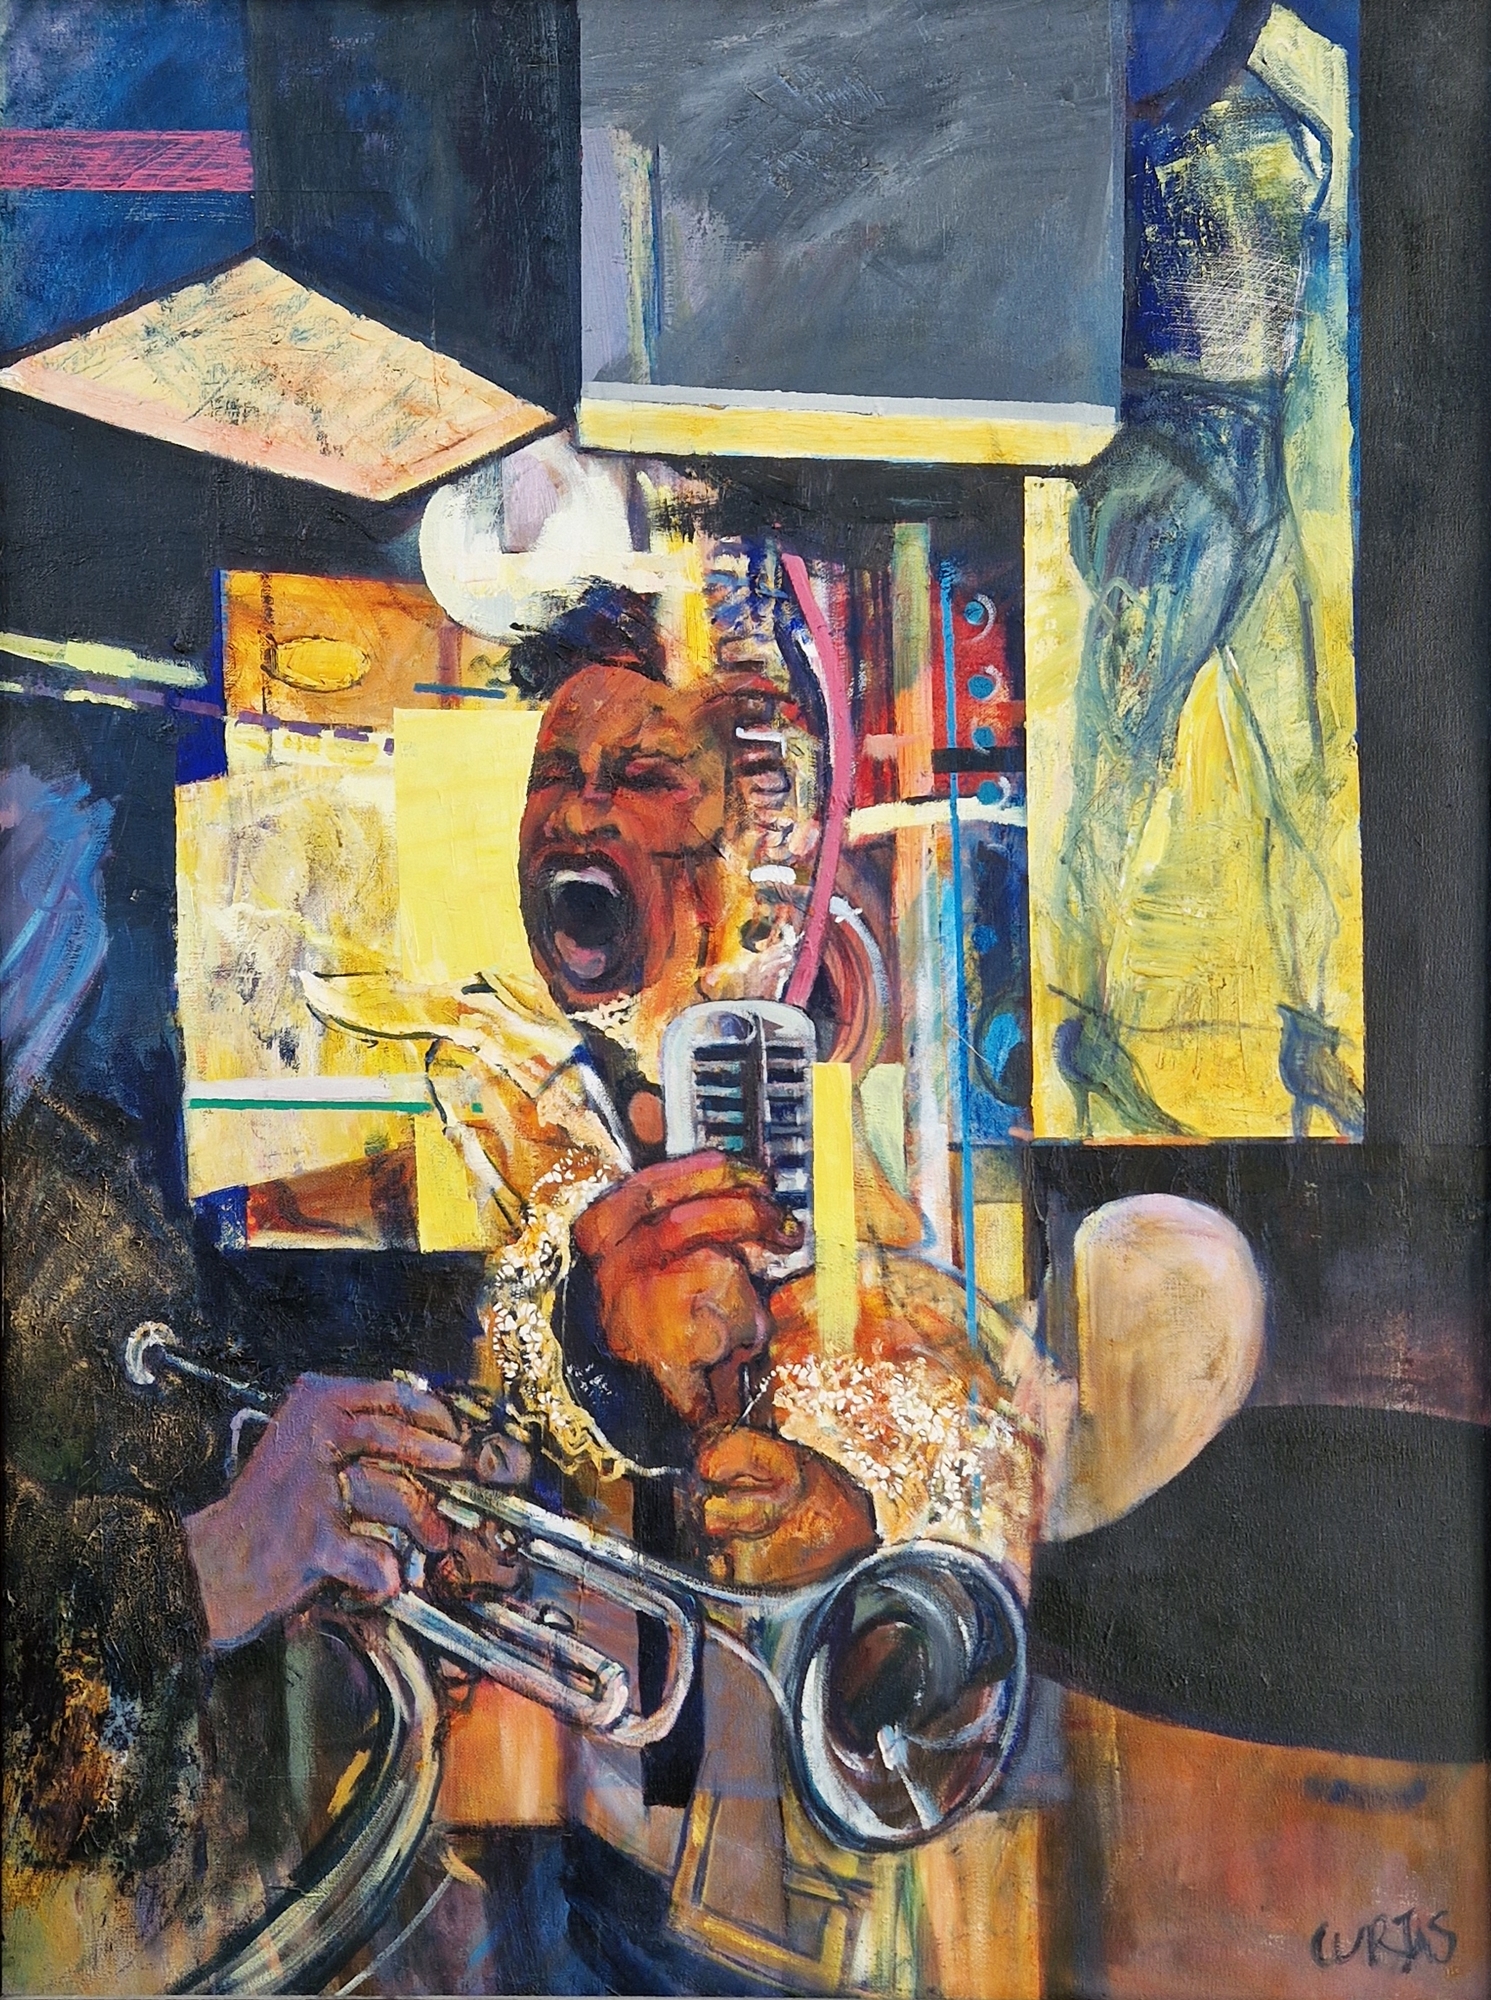 Andrew Curtis Oil on canvas Jazz singer with microphone and trumpeter, signed ‘CURTIS’ in capitals